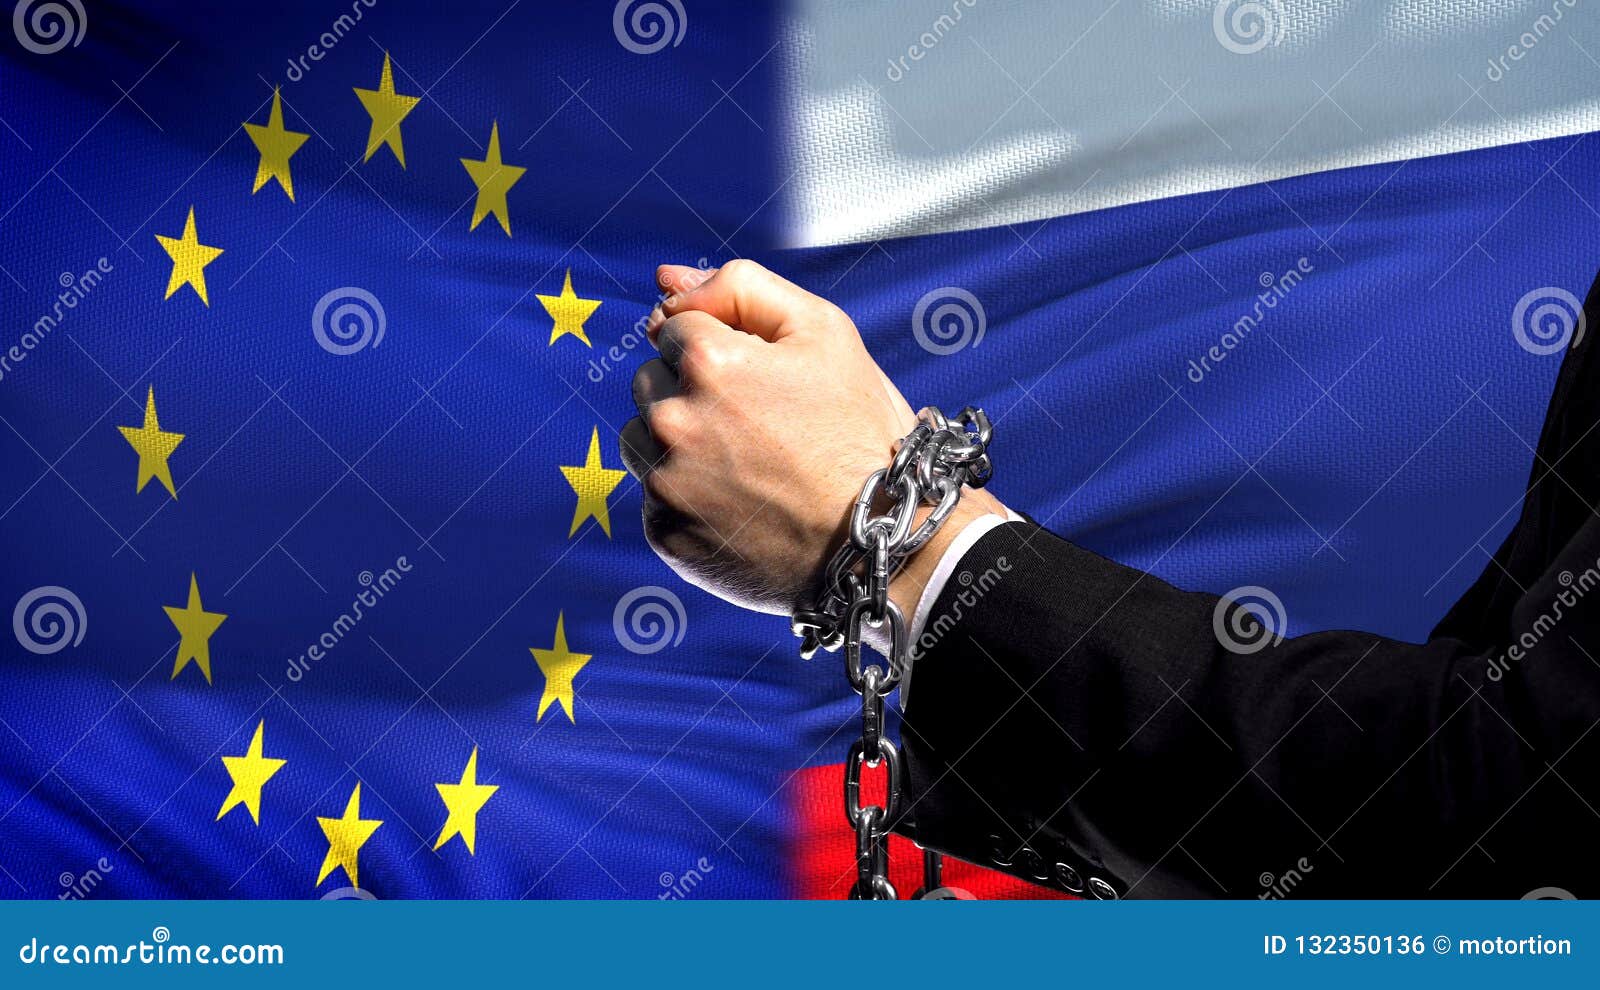 european union sanctions russia, chained arms, political or economic conflict